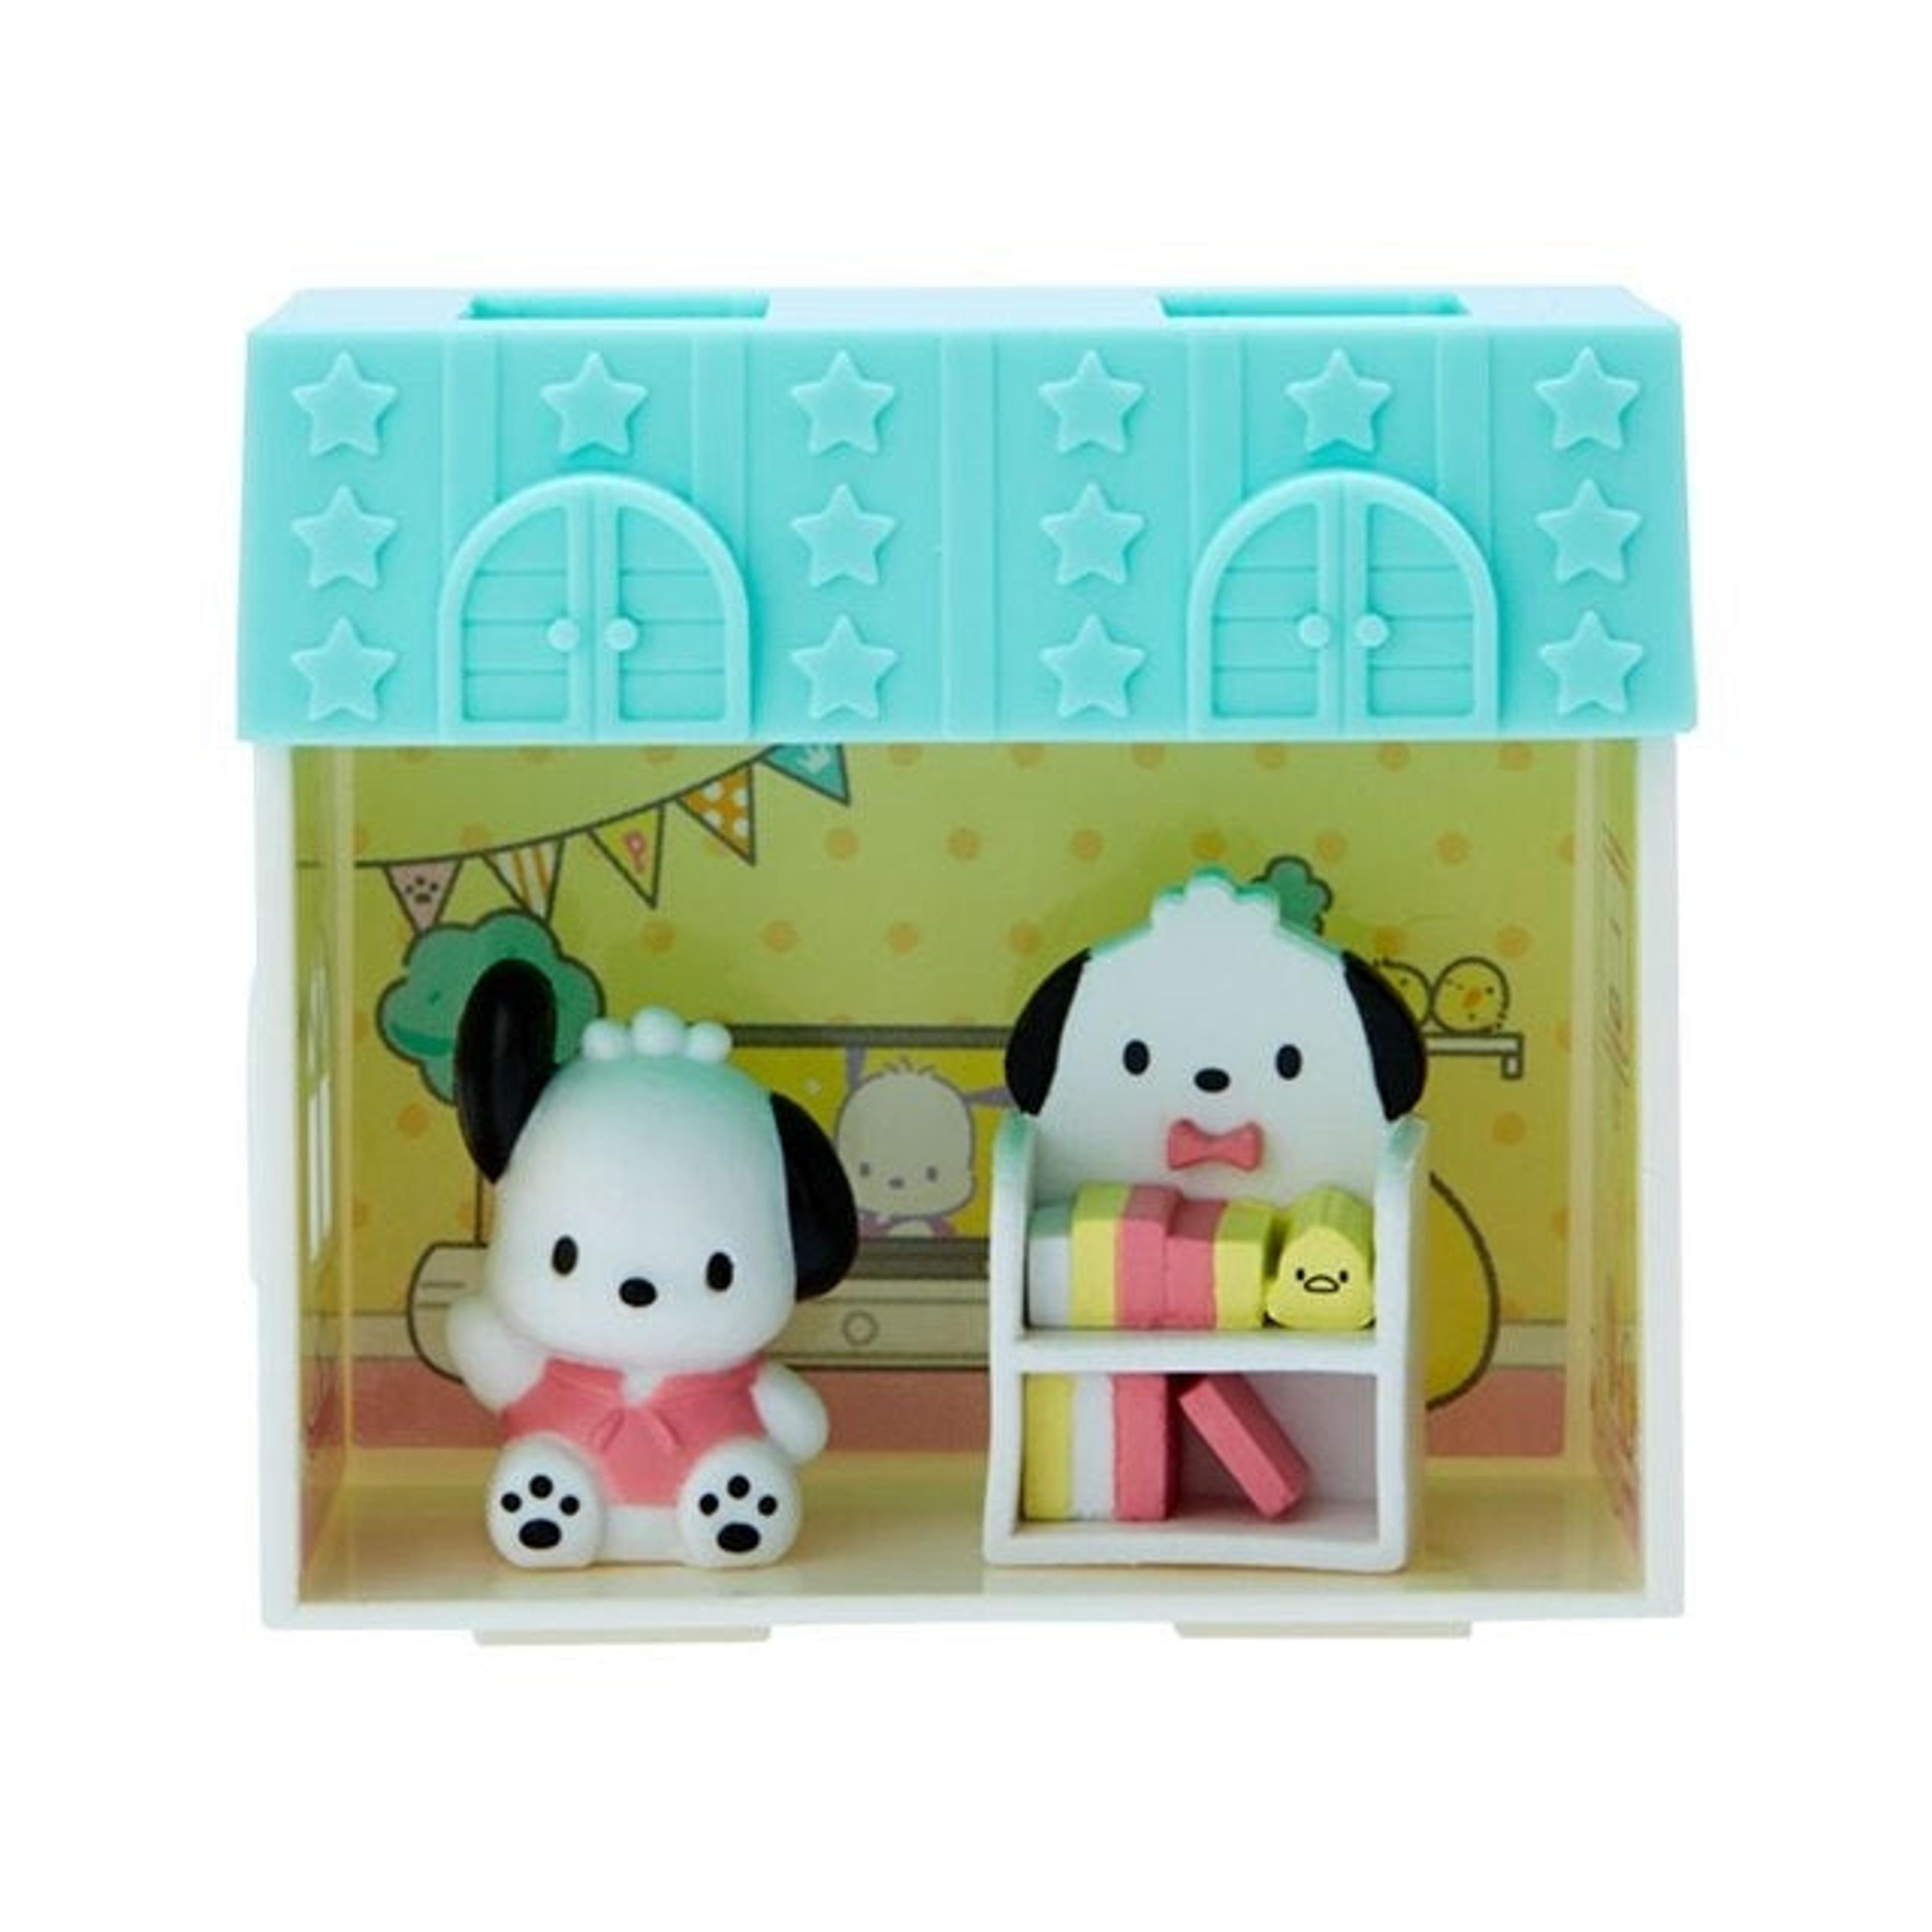 Alternate View 9 of Sanrio Characters Miniature House